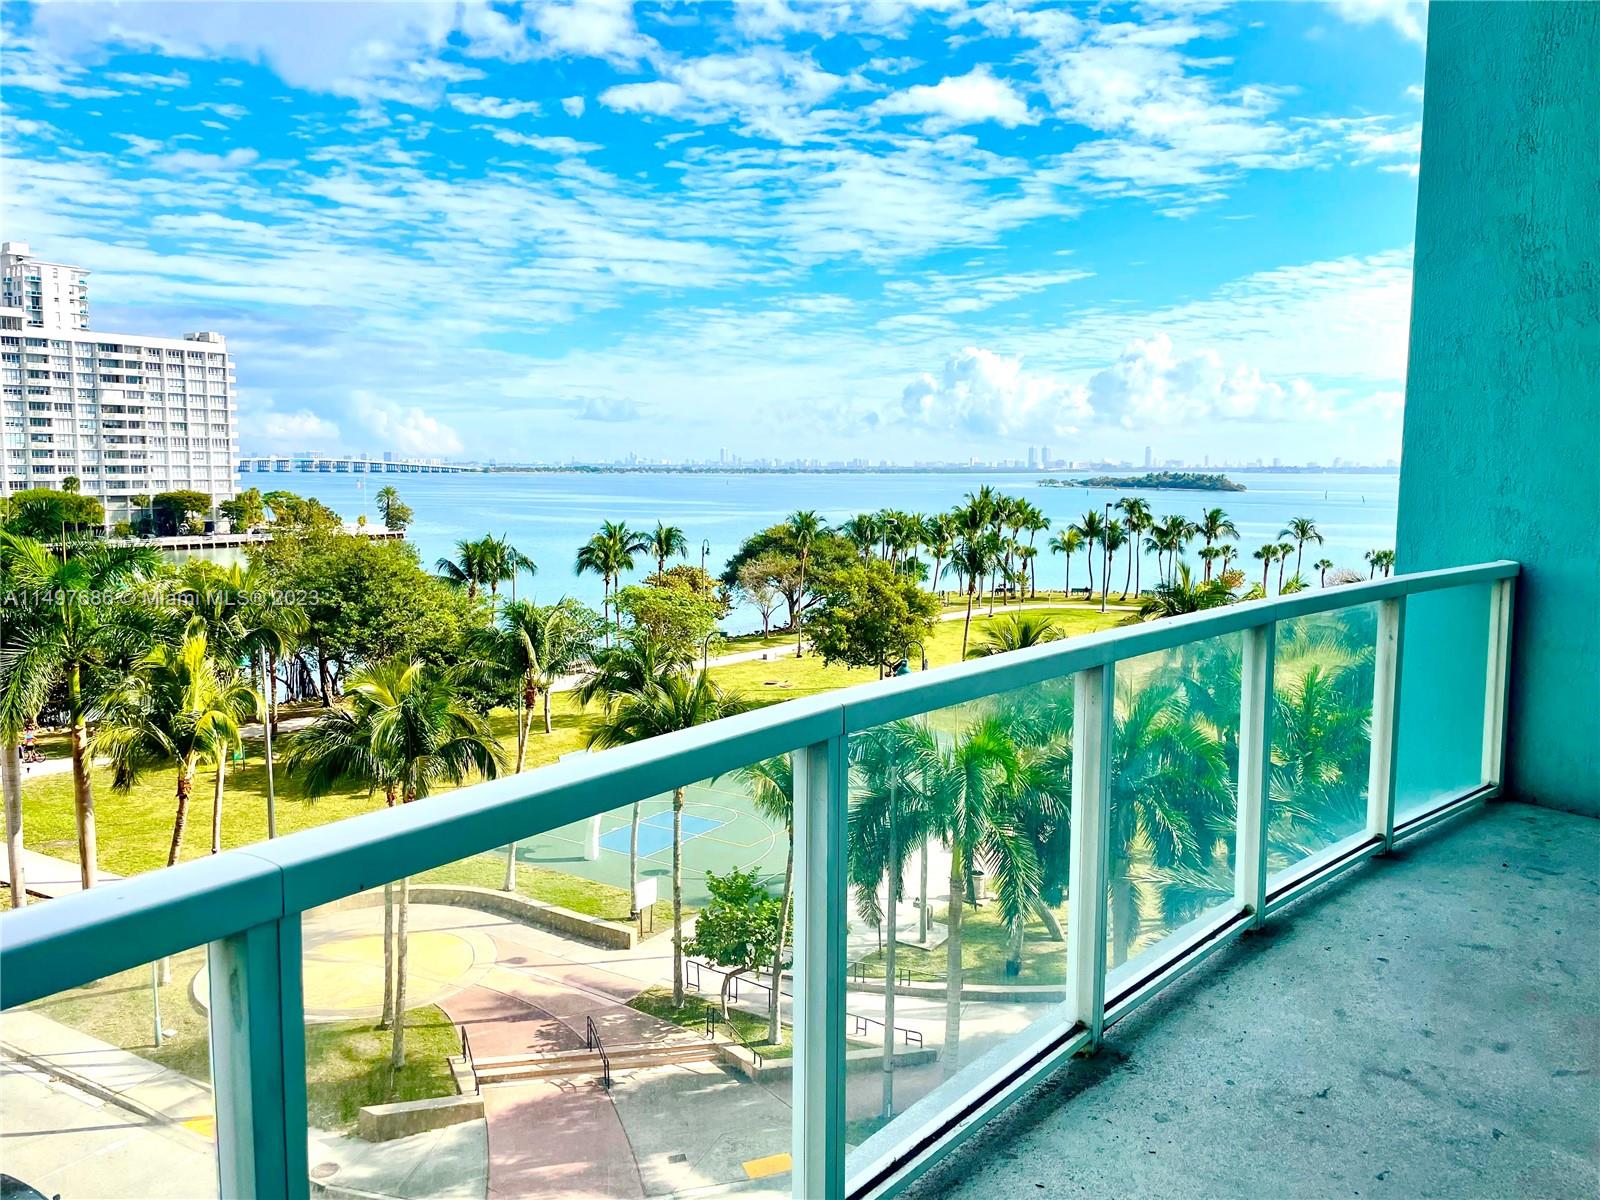 Beautiful and bright waterfront view loft (bedroom not enclosed) with large balcony. 14' high ceilings and open floorpan overlooking Margaret Pace Park and Biscayne Bay. Walk to Miami Metromover, Publix, and restaurants. Current tenant has lease in place until 2/28/24 but can vacate with 30 day notice. Applicants must submit ID, Background check, Proof of income, and credit report.